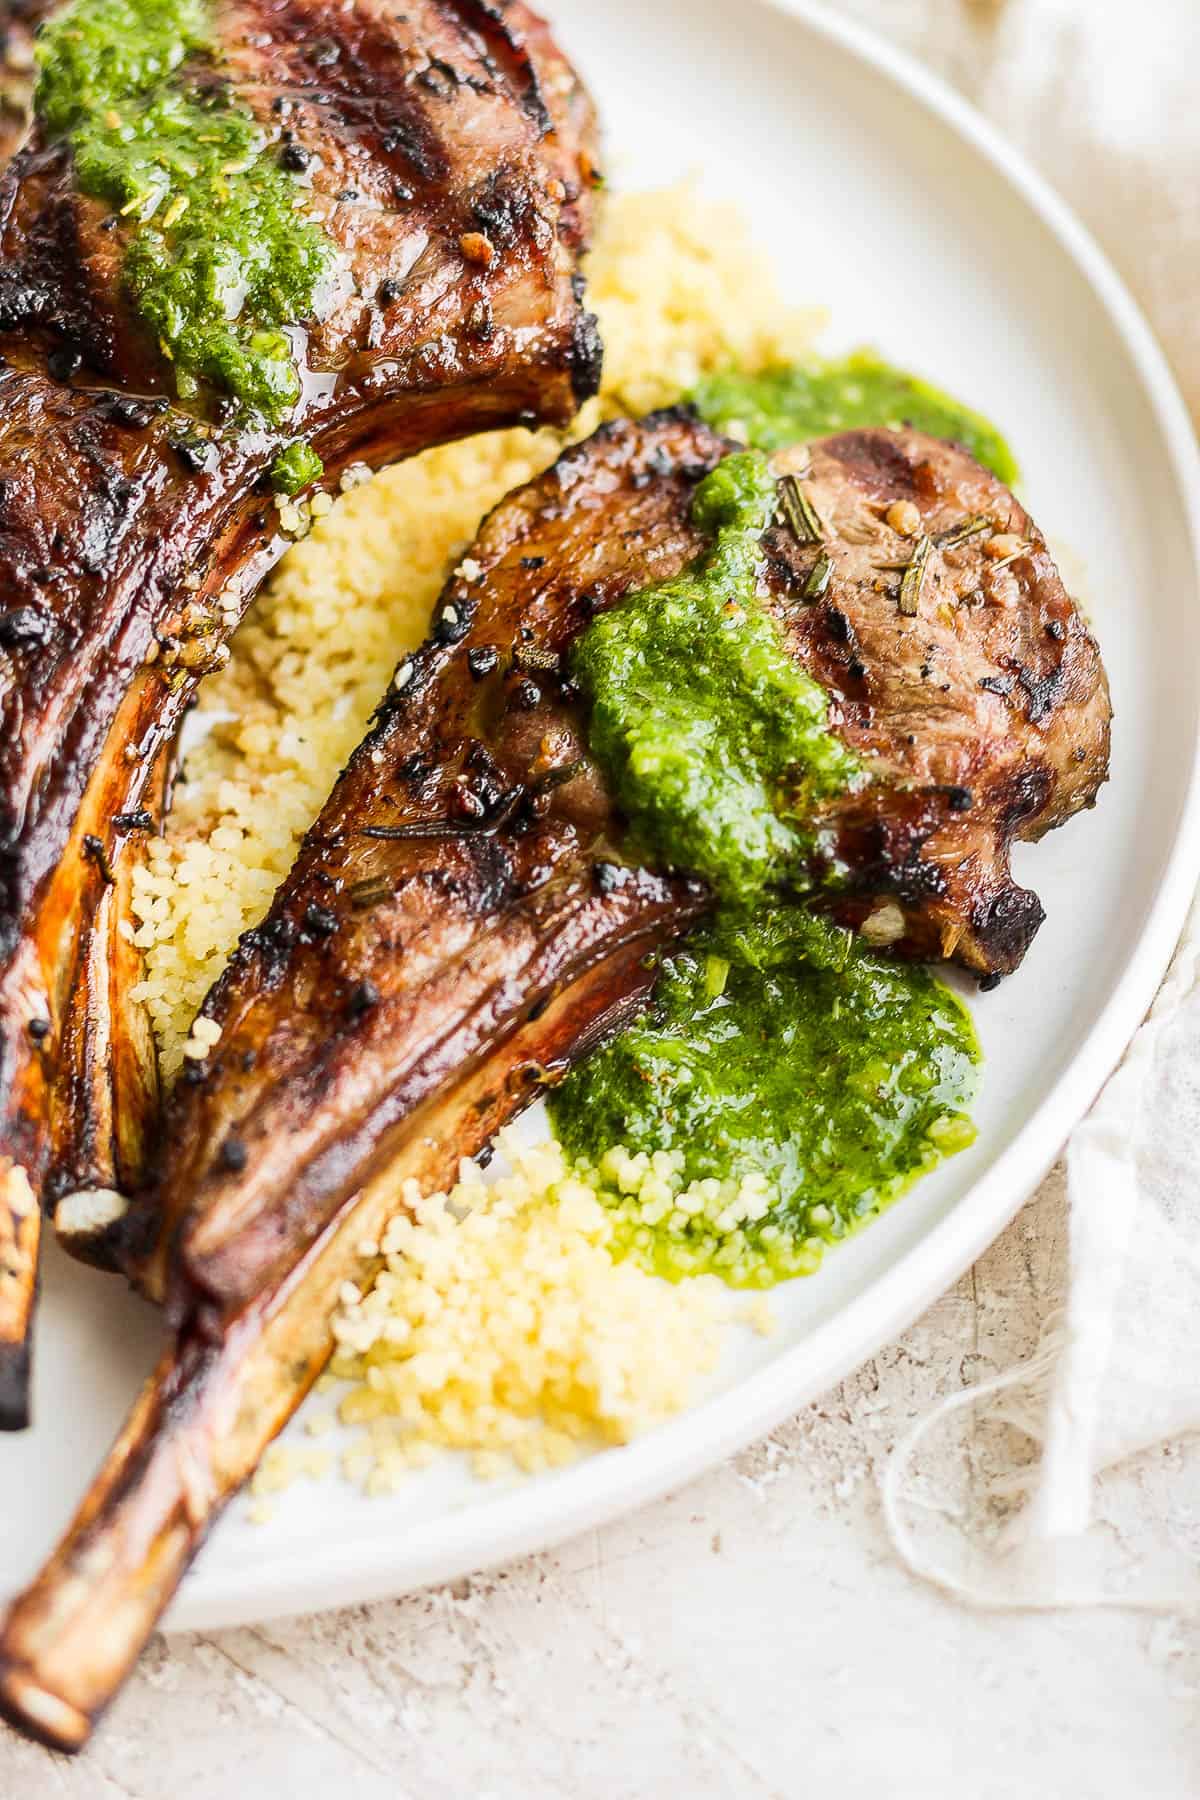 Two lamb chops drizzled with mint chimichurri on a bed of cous cous on a plate.